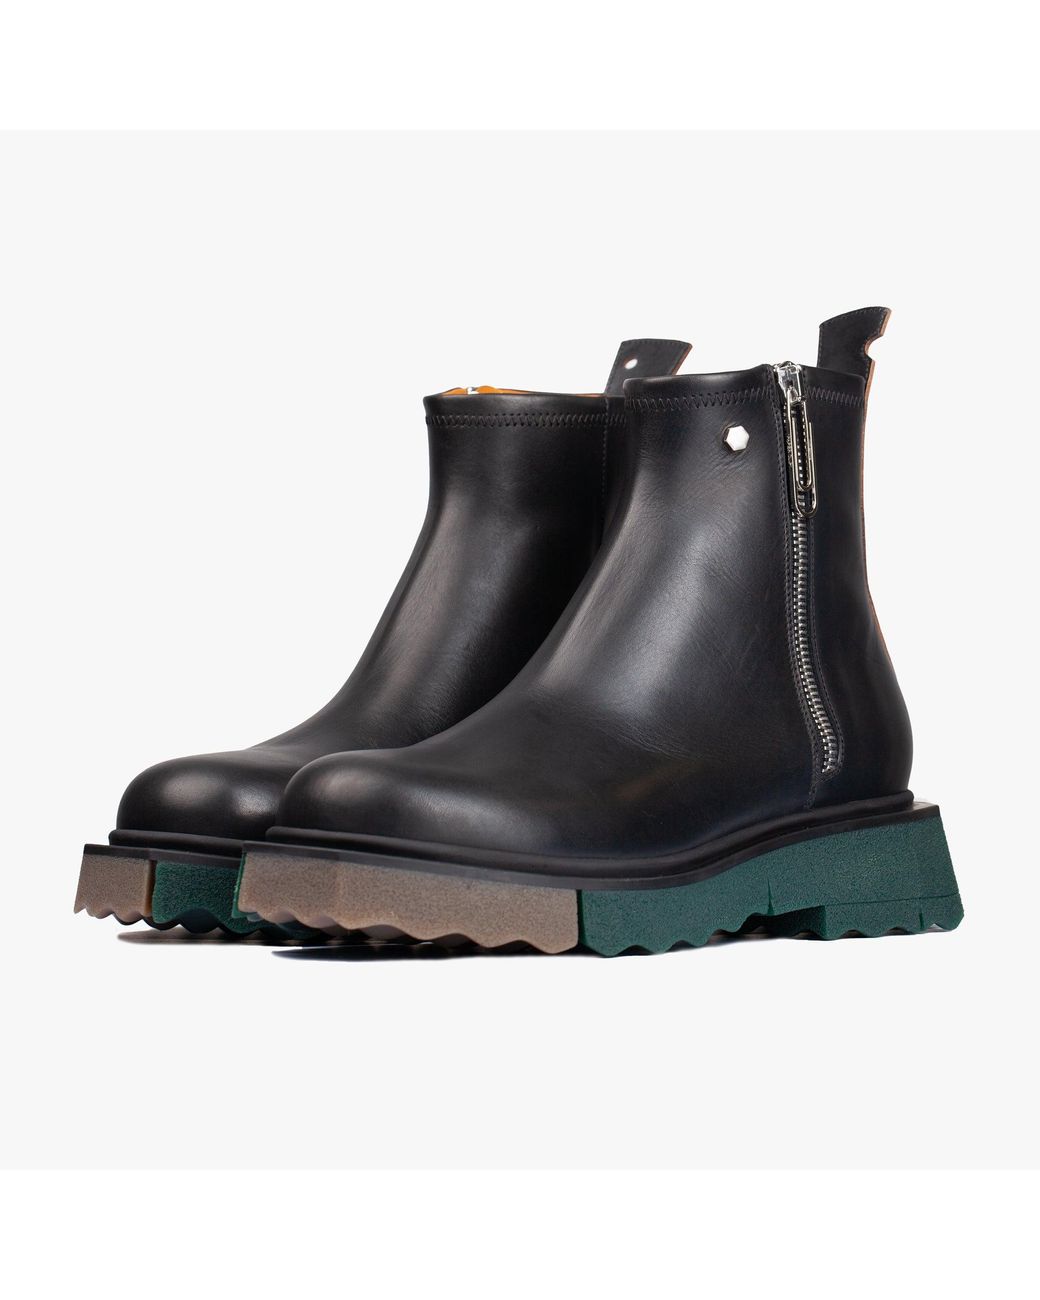 Off-White c/o Virgil Abloh Sponge Sole Leather Zip Boots in Black for 